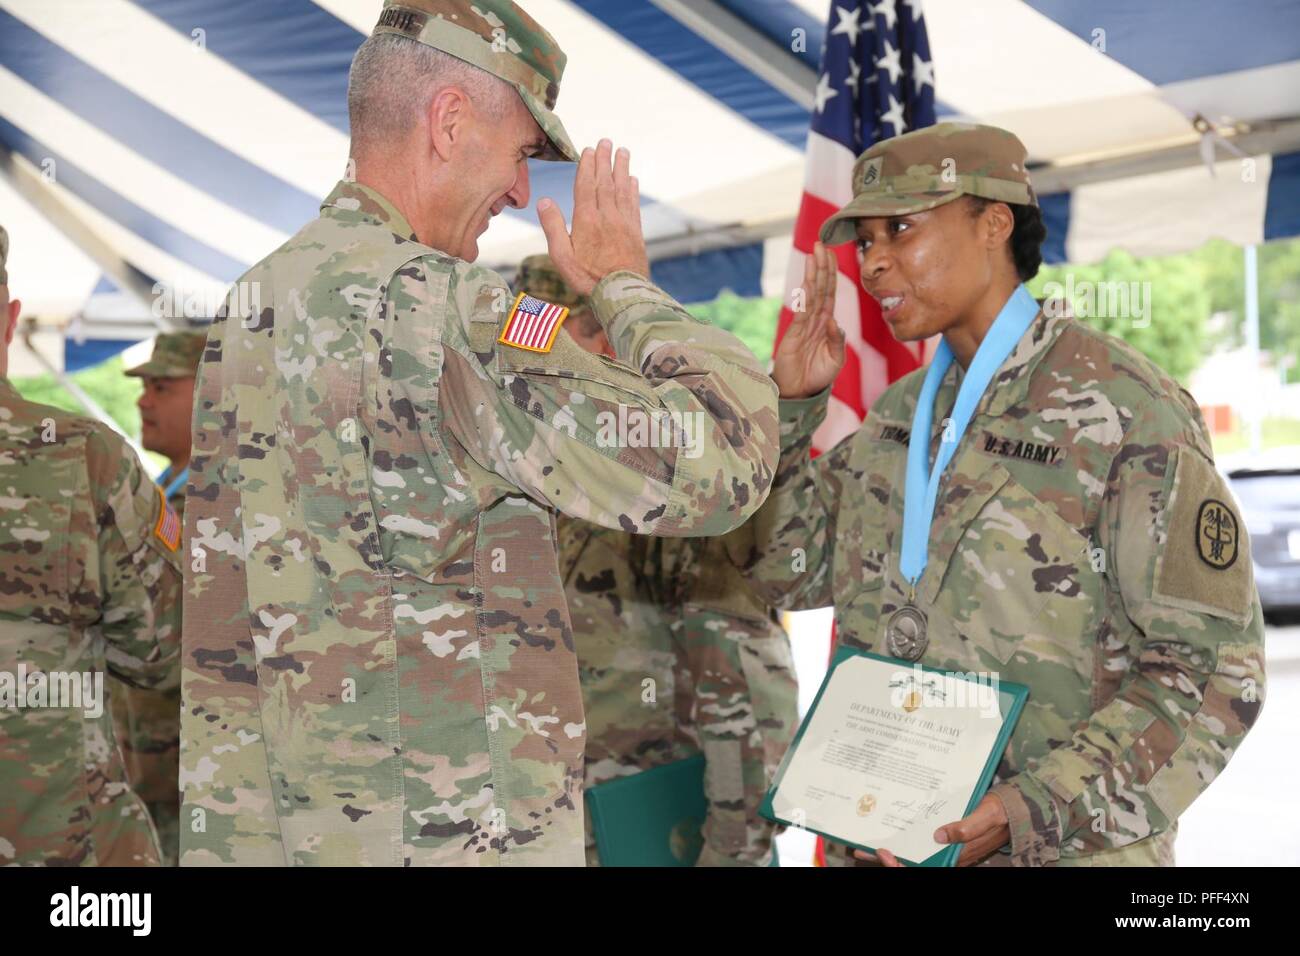 Staff Sgt. April Thomas, assigned to Public Health Activity Japan, salutes Maj. Gen. James F. Pasquarette, commanding general of USARJ after receiving an Audie Murphy induction award June 13, 2018 outside the Camp Zama Community Club for the Army Birthday Week celebration. Stock Photo